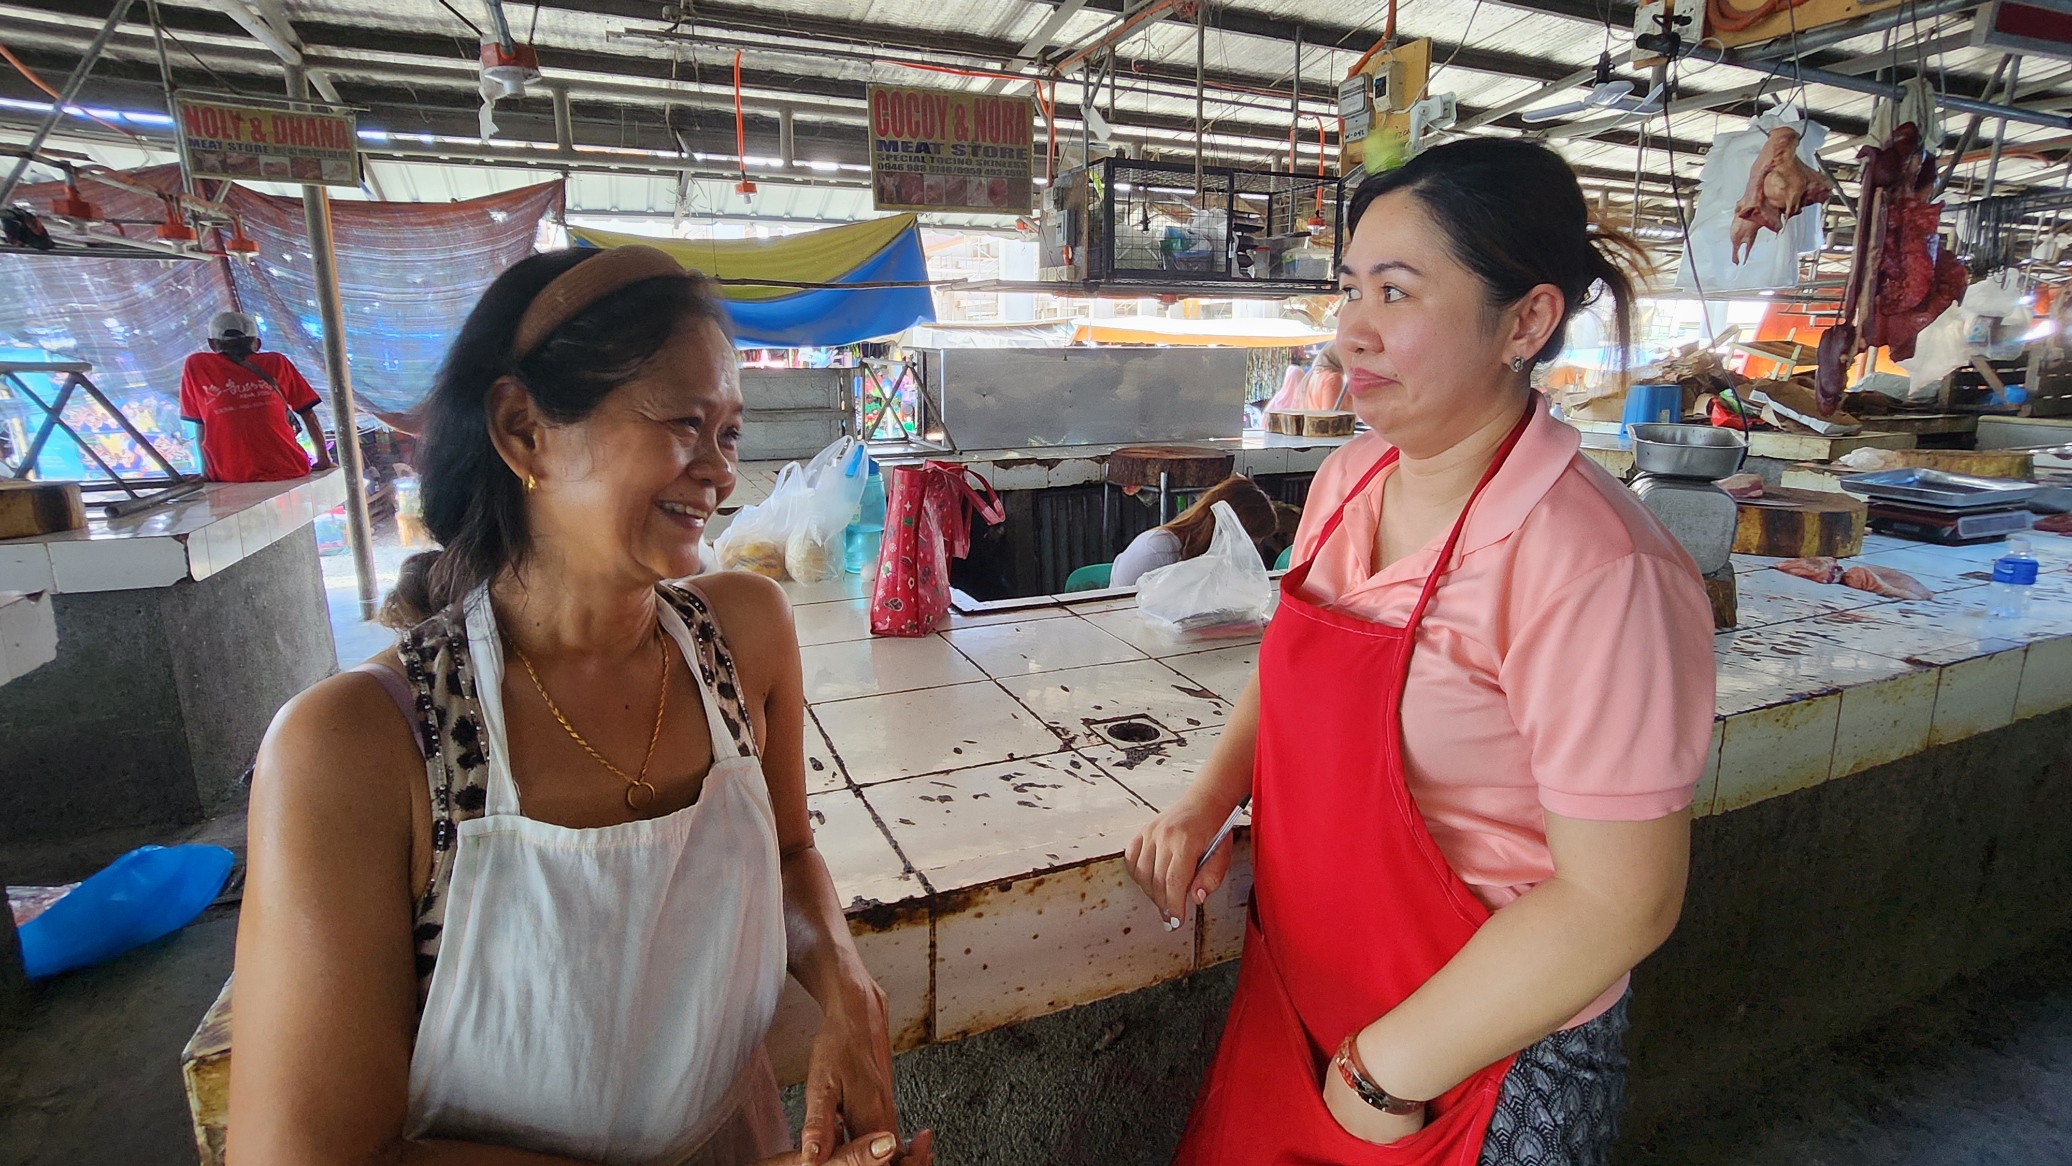 Tarlac City Meat Vendors Association vice president Tess Salvador and secretary Cristy Tañedo air their frustrations about the lack of city government assistance to the issues vendors are having at the RUA market.